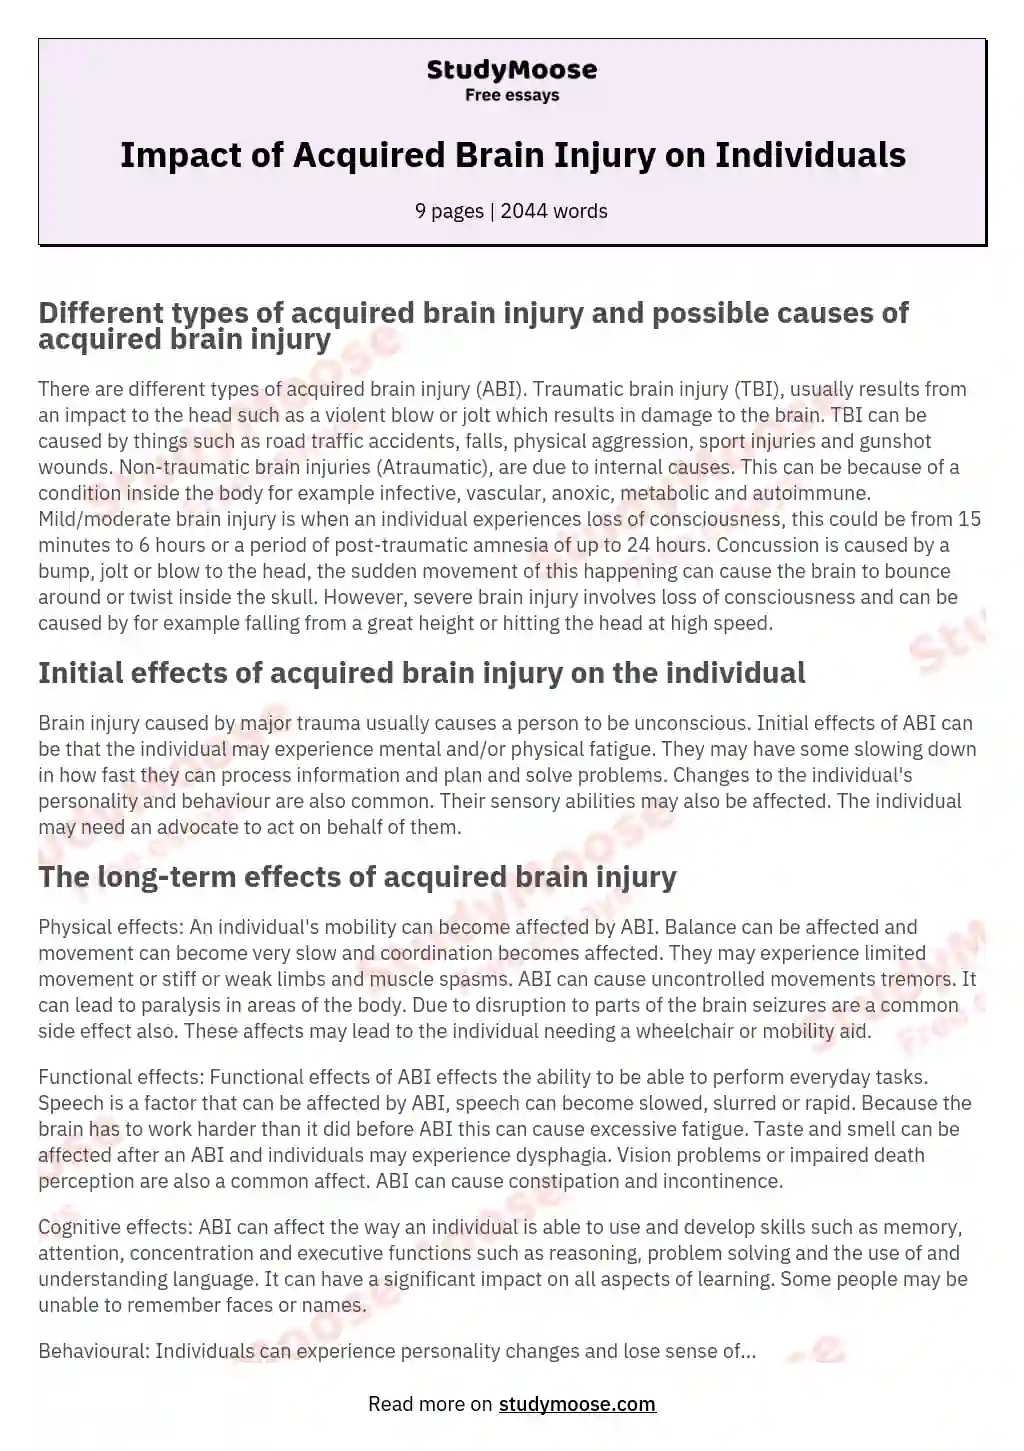 Impact of Acquired Brain Injury on Individuals